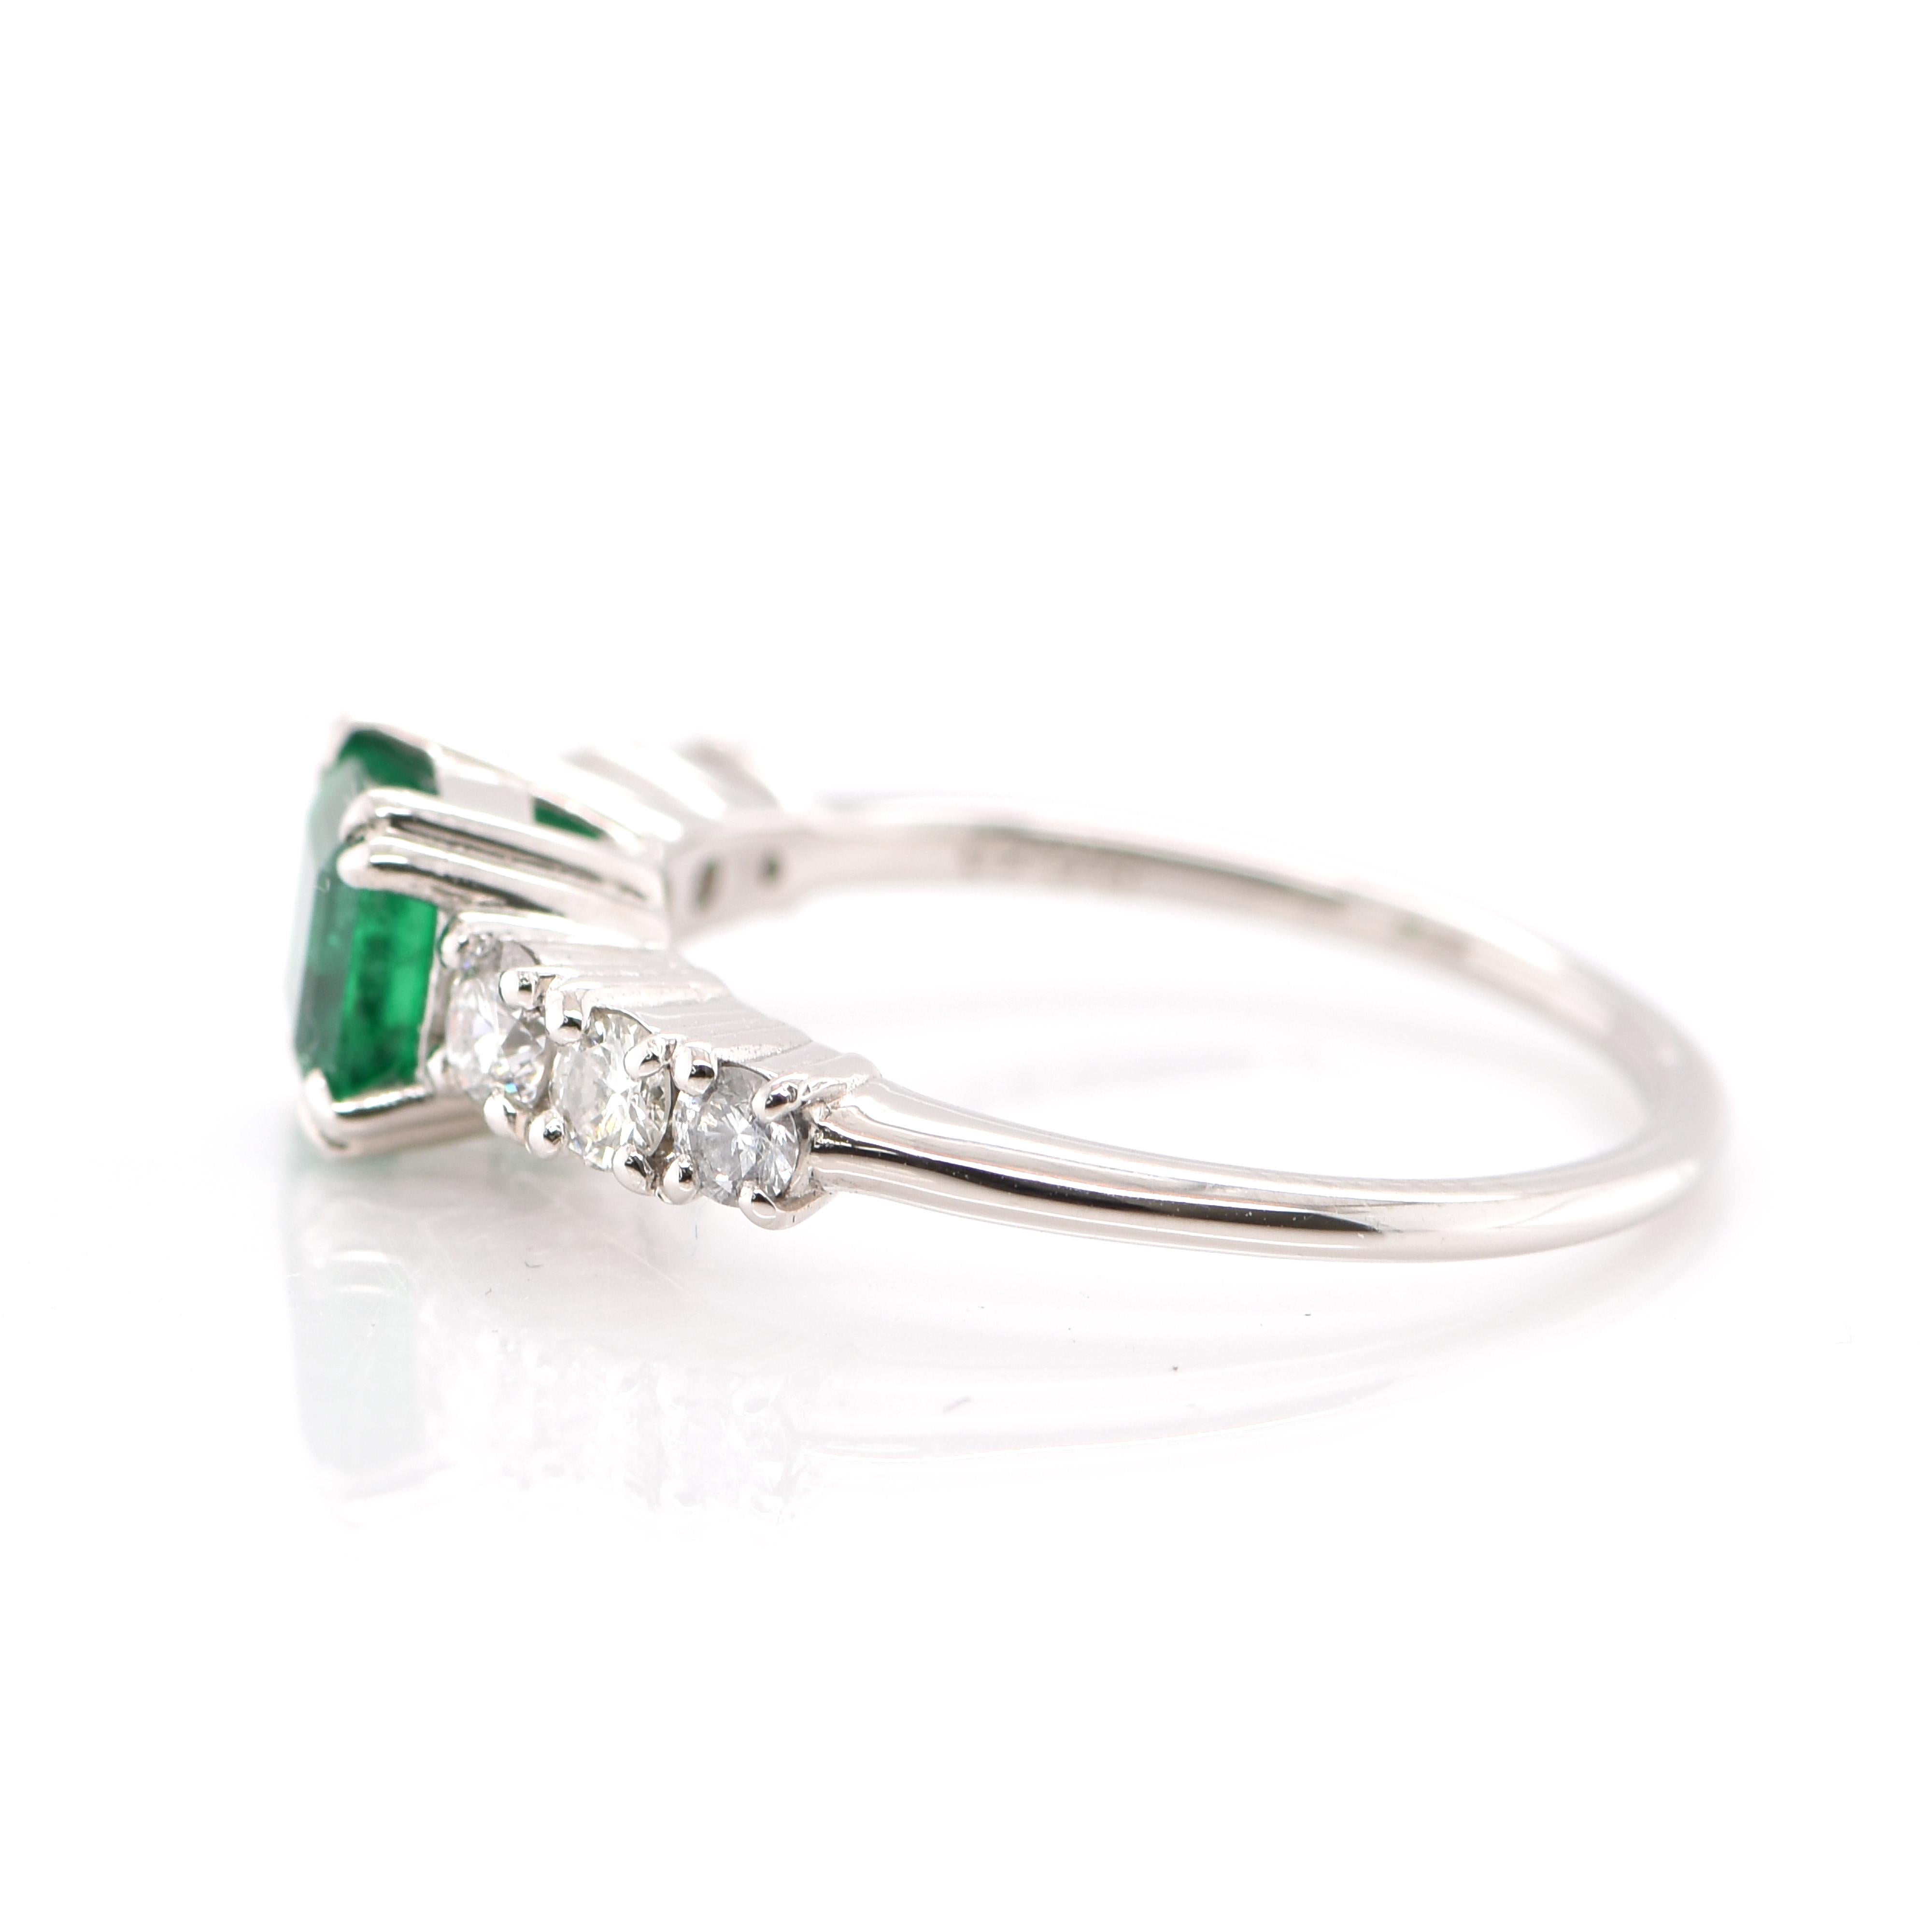 Emerald Cut 0.74 Carat Natural Emerald and Diamond Engagement Ring Set in Platinum For Sale